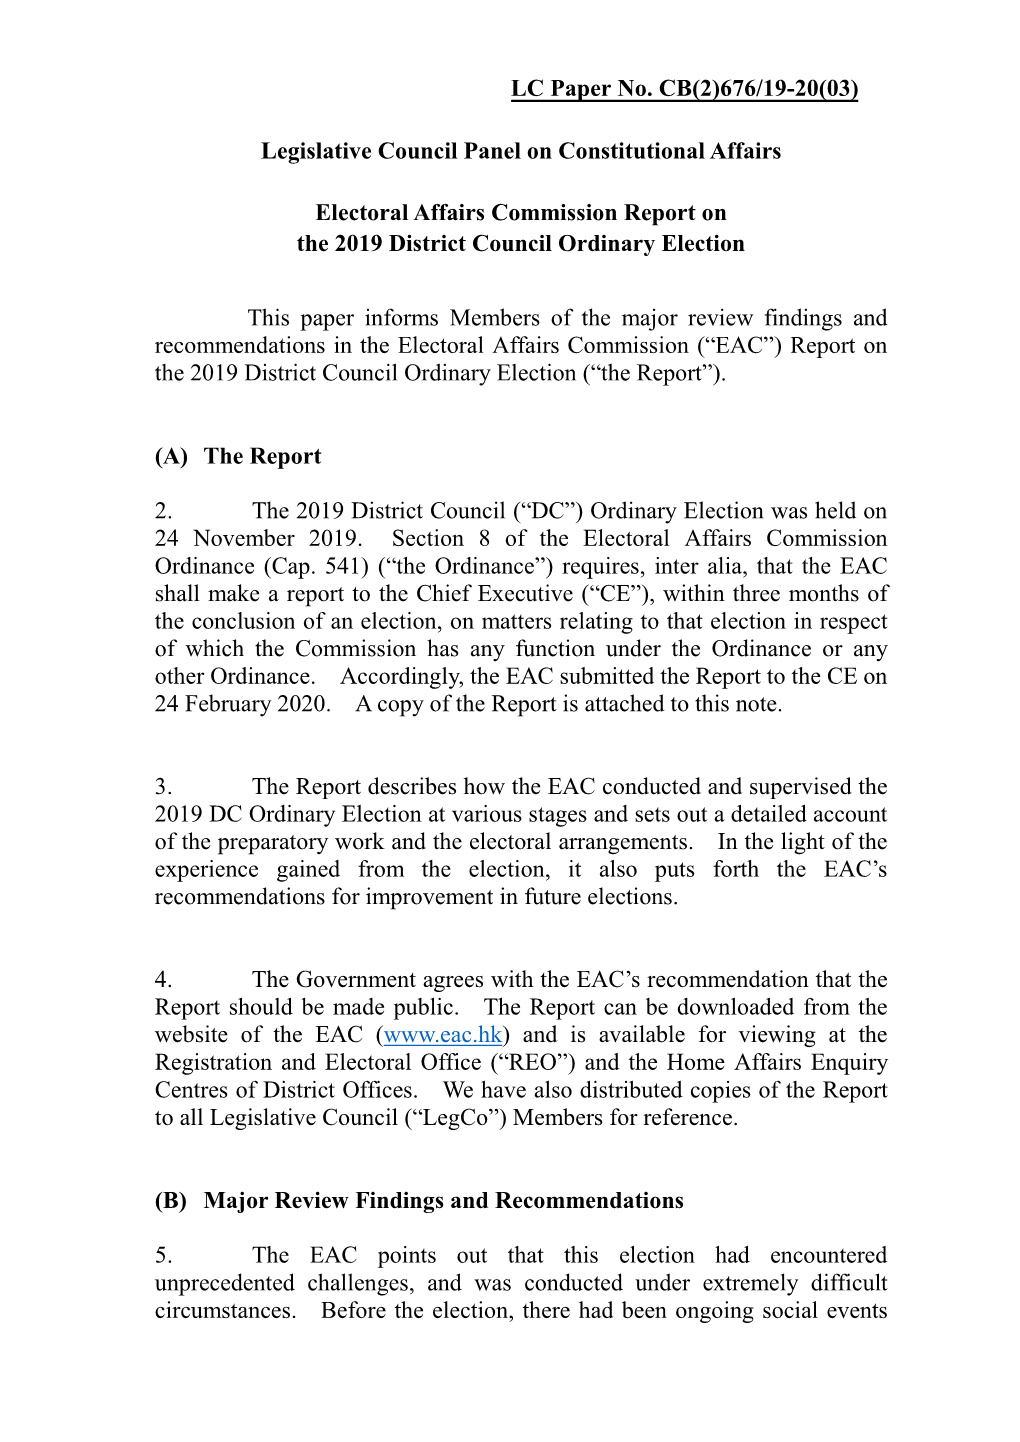 Administration's Paper on Electoral Affairs Commission Report on The